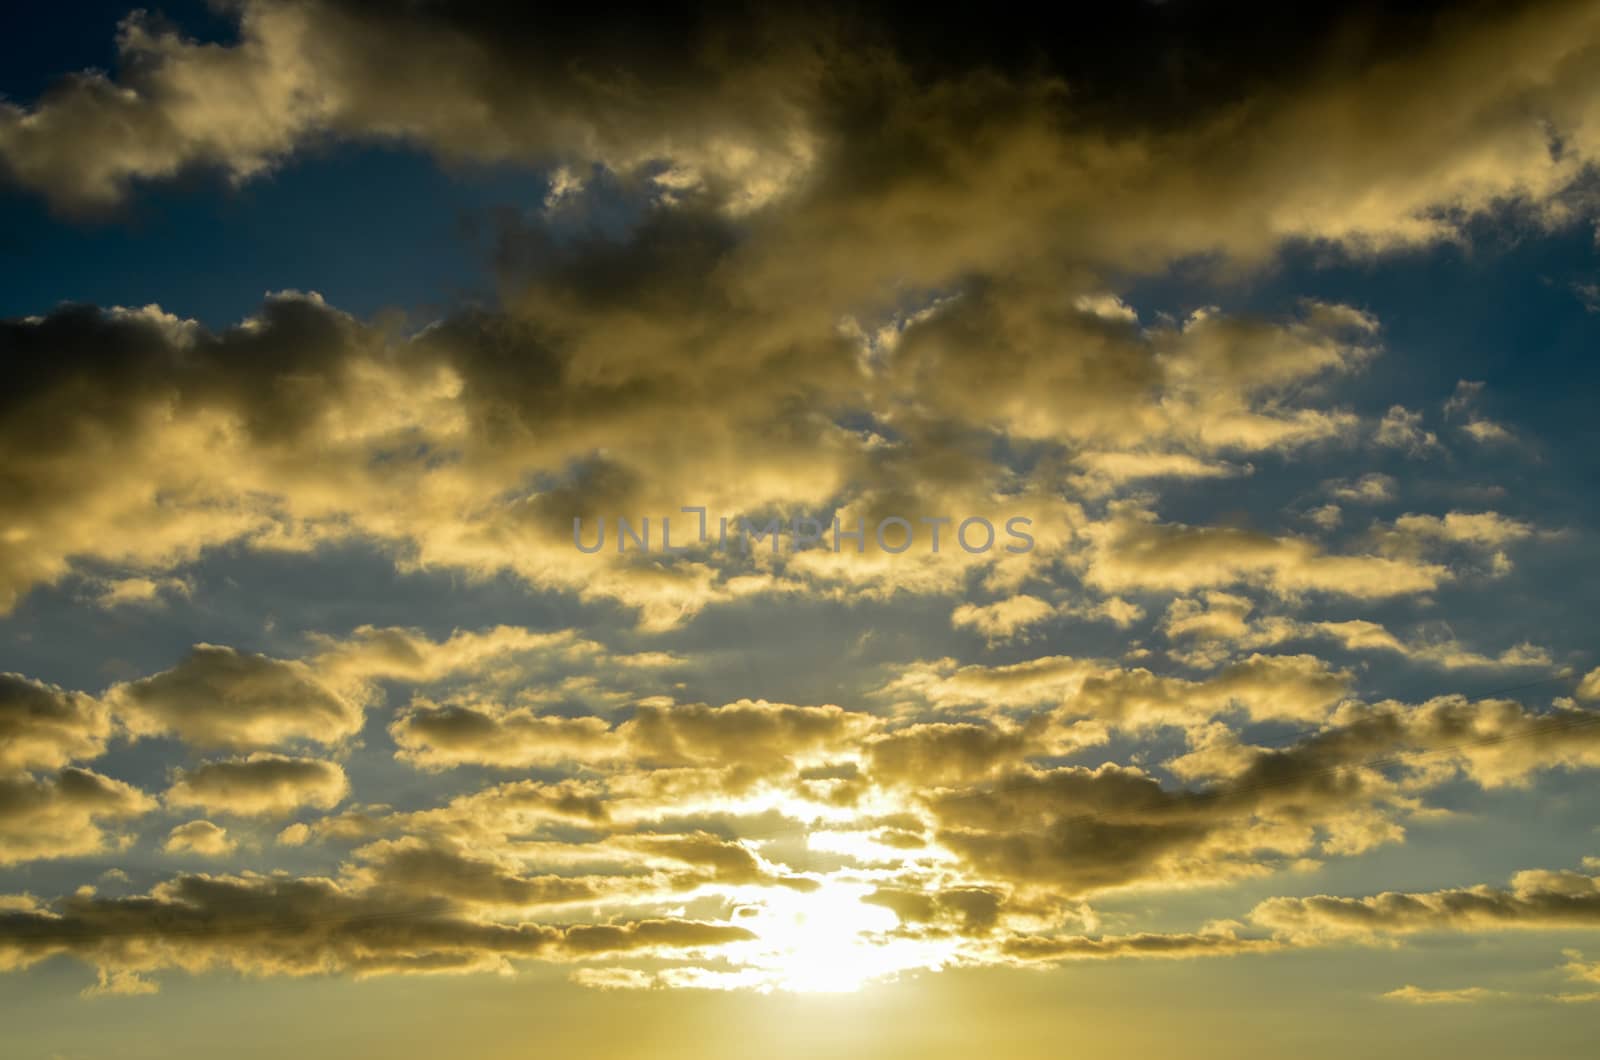 Cloudscape, Colored Clouds at Sunset in Tenerife Canary Islands Spain